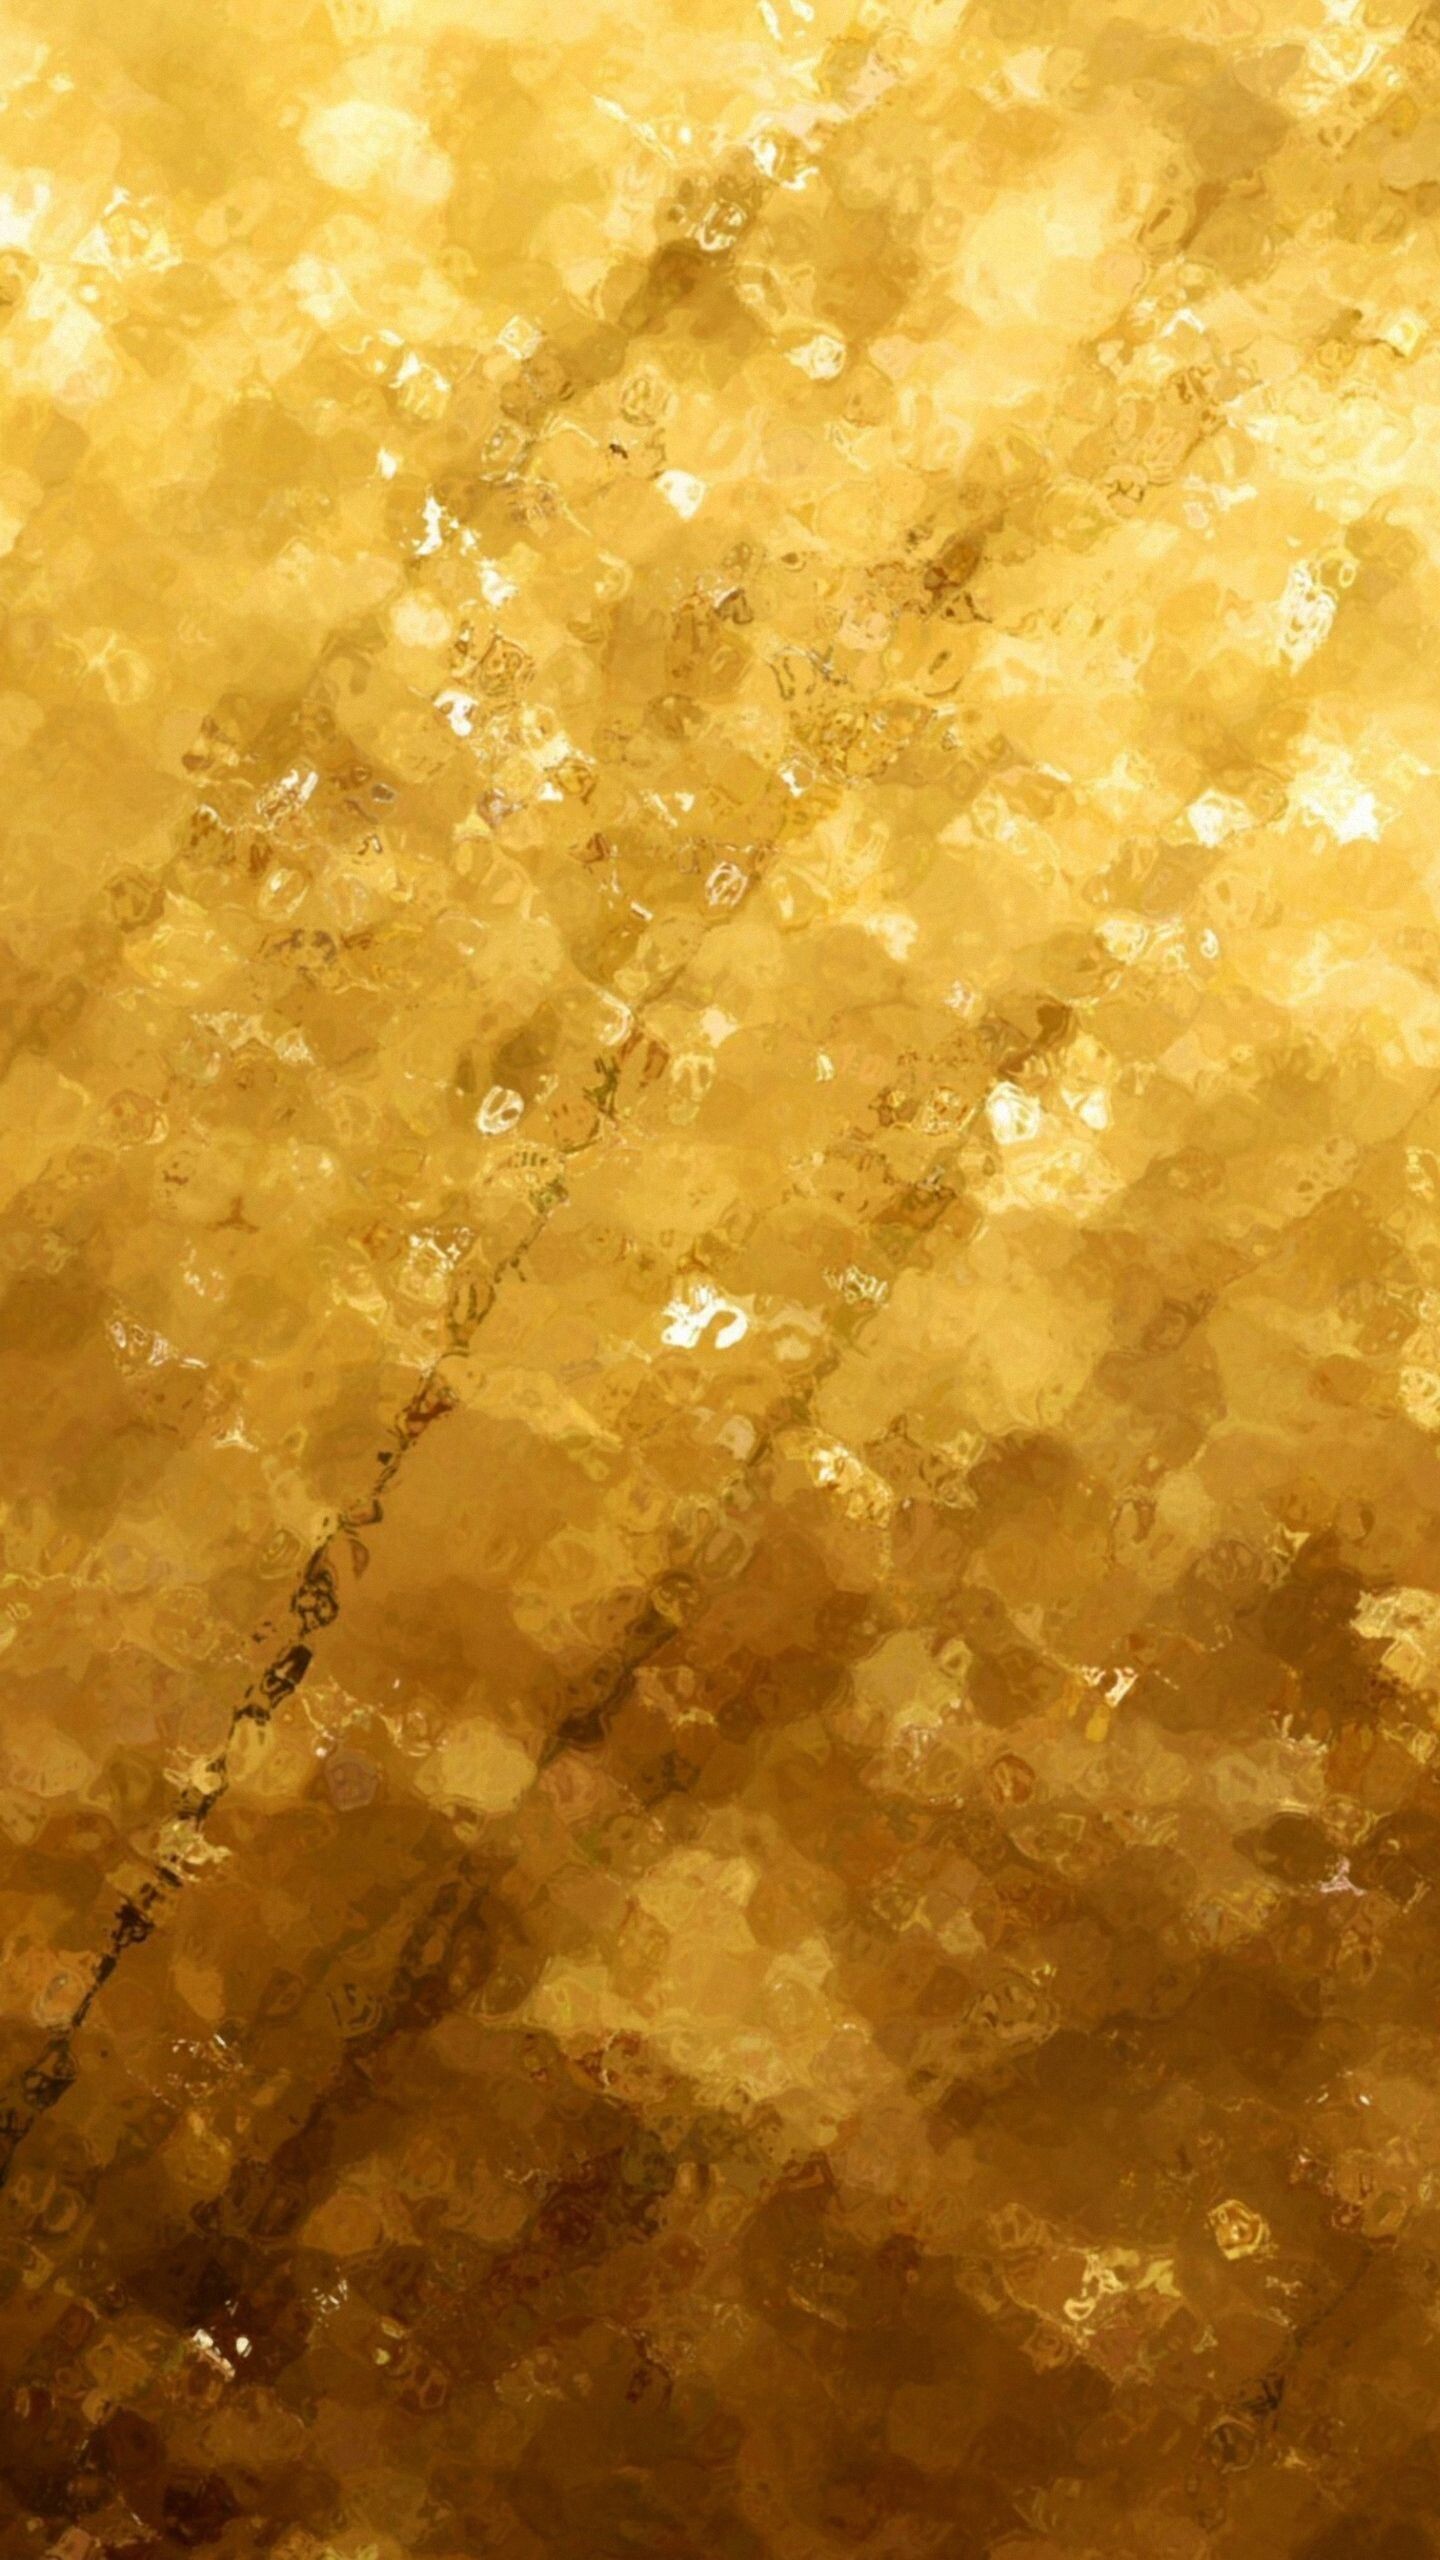 Gold Sparkle: Out-of-focus blurred lights, Light-reflecting golden decorative material, Tints and shades. 1440x2560 HD Background.